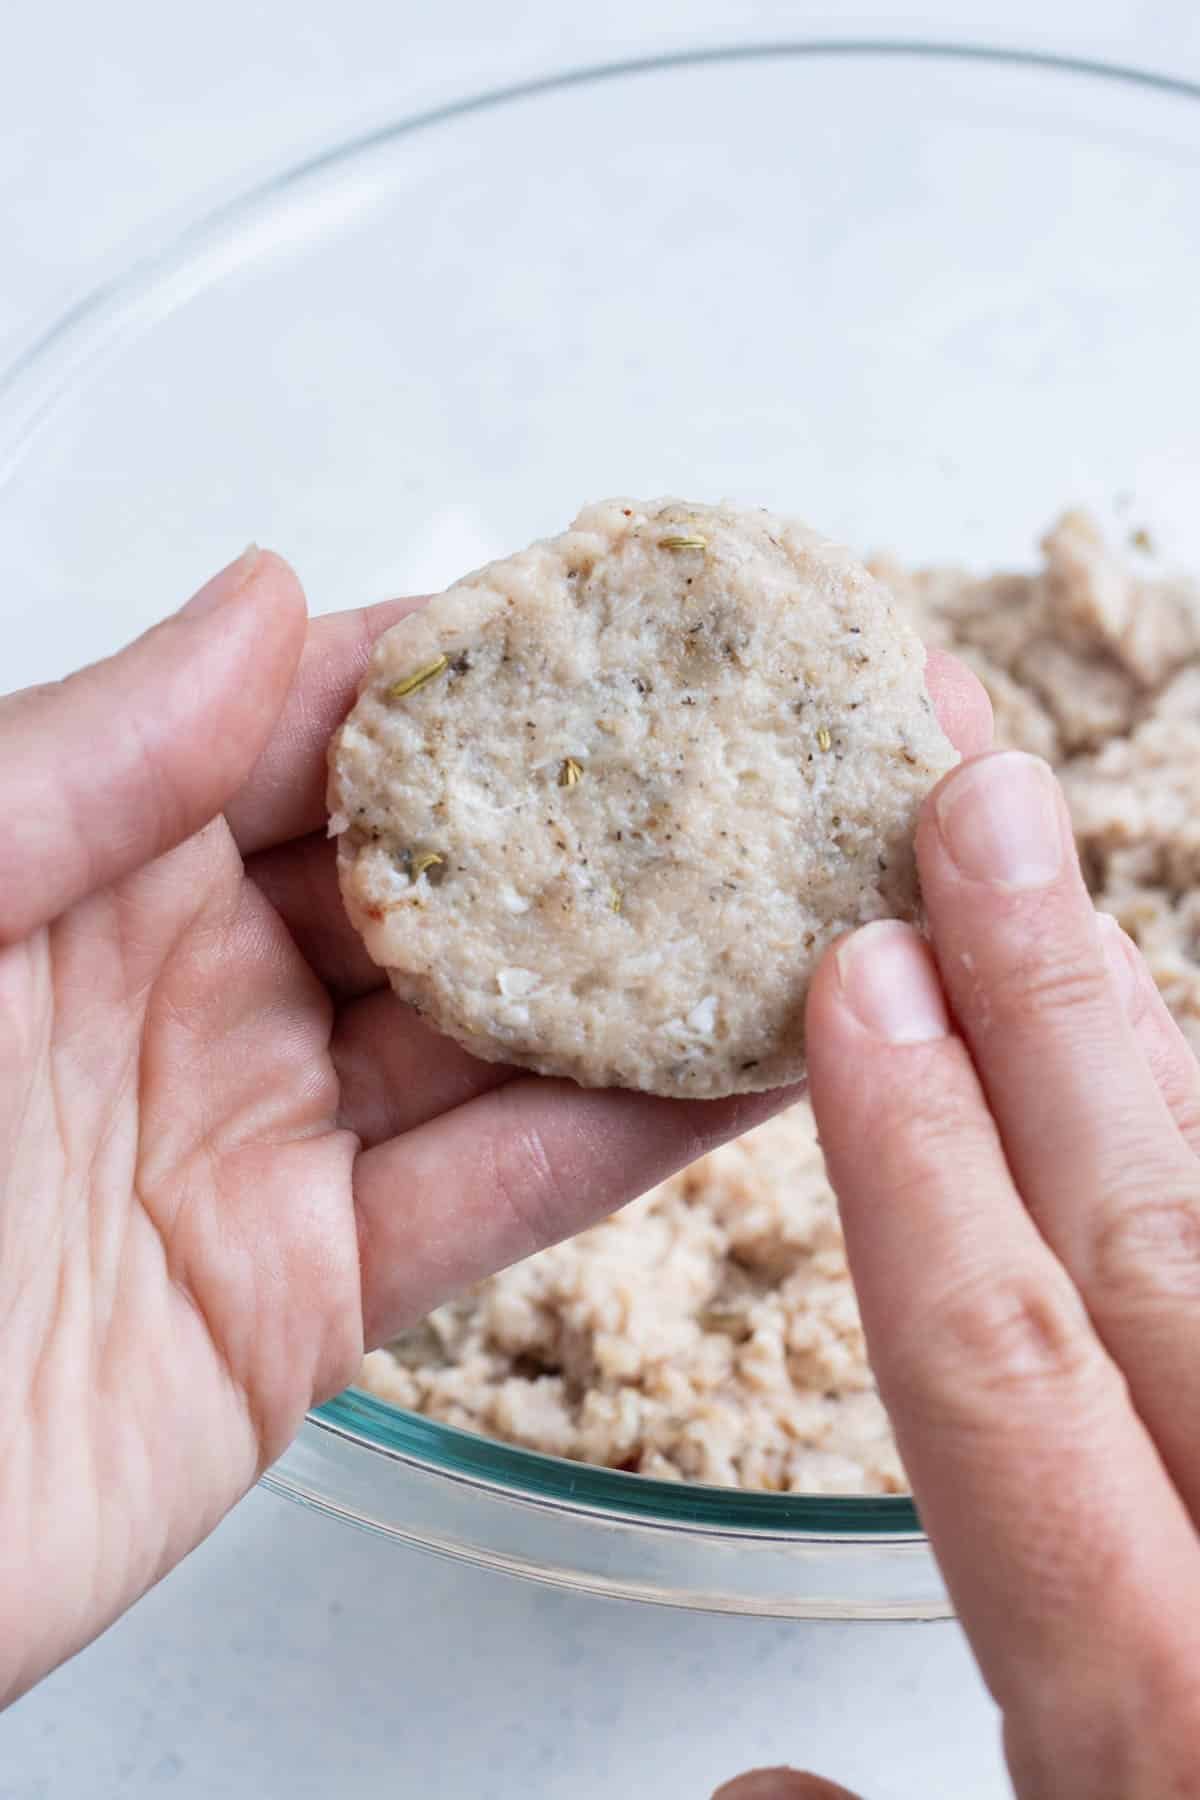 Sausage patties are formed and pressed in a hand.